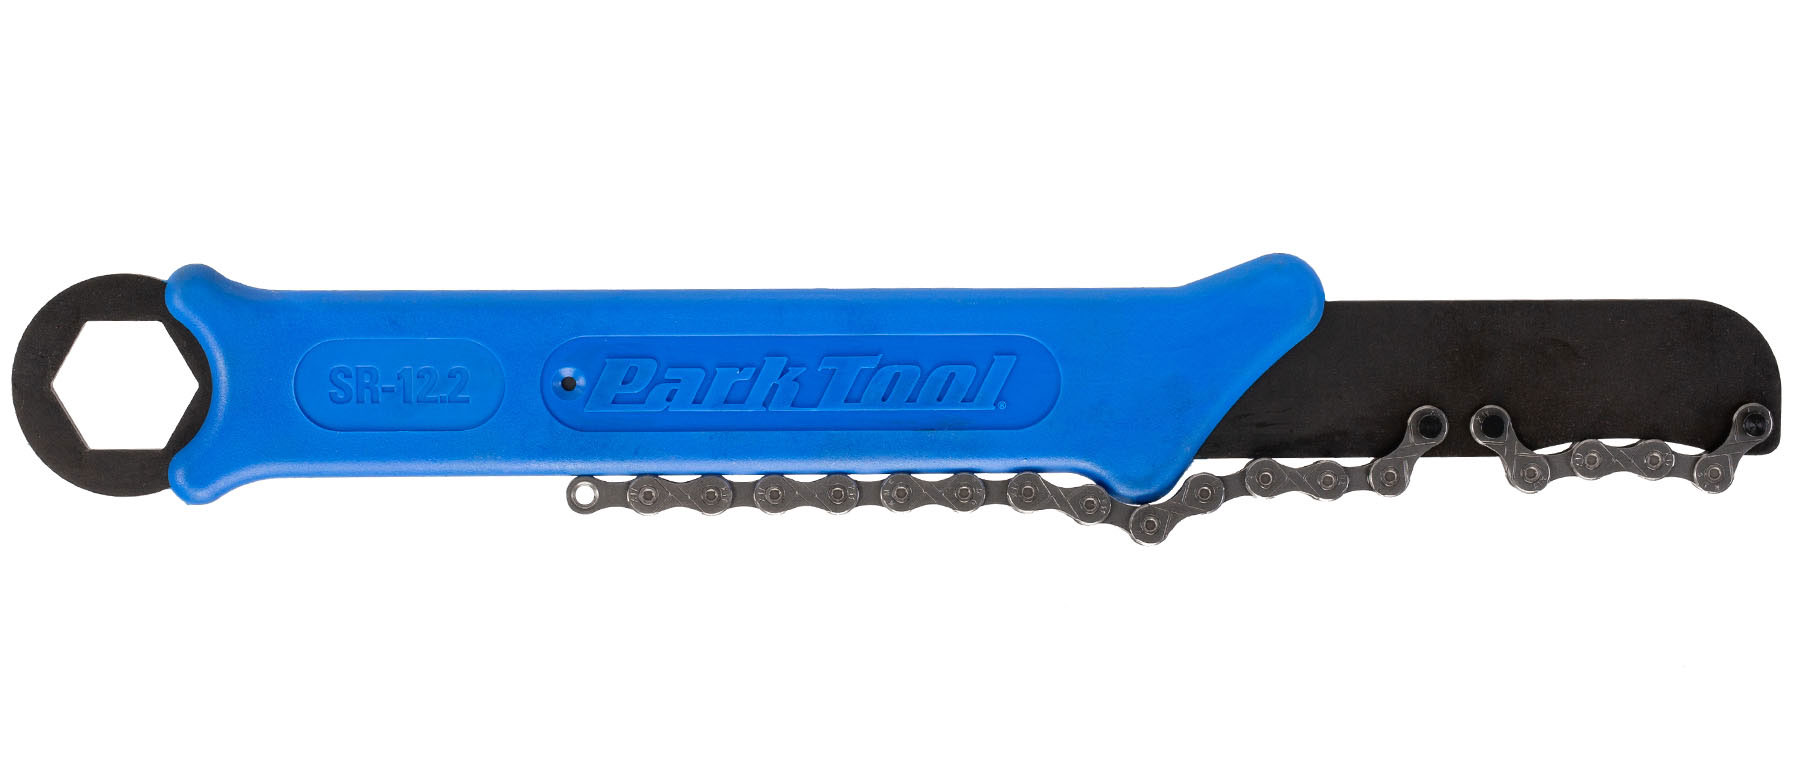 Park Tool SR-12.2 Sprocket Remover and Chain Whip